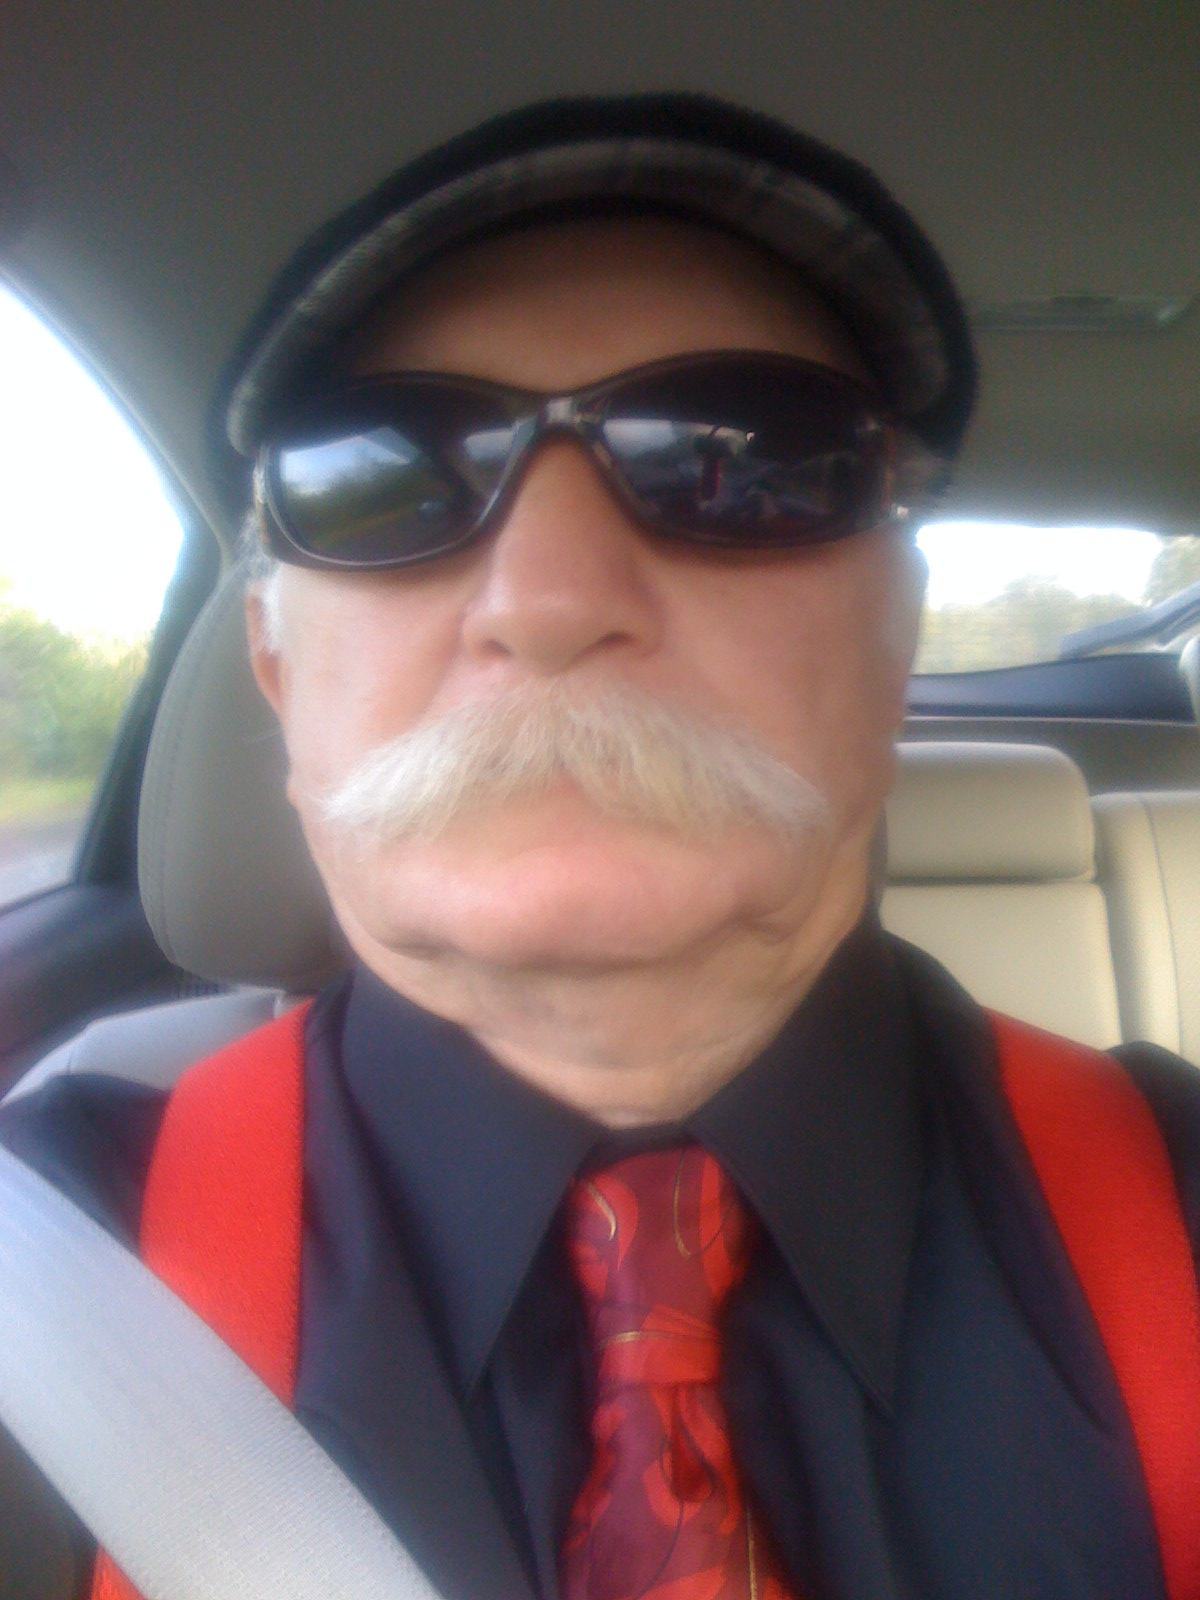 a bearded man wearing a suit and tie, driving a car